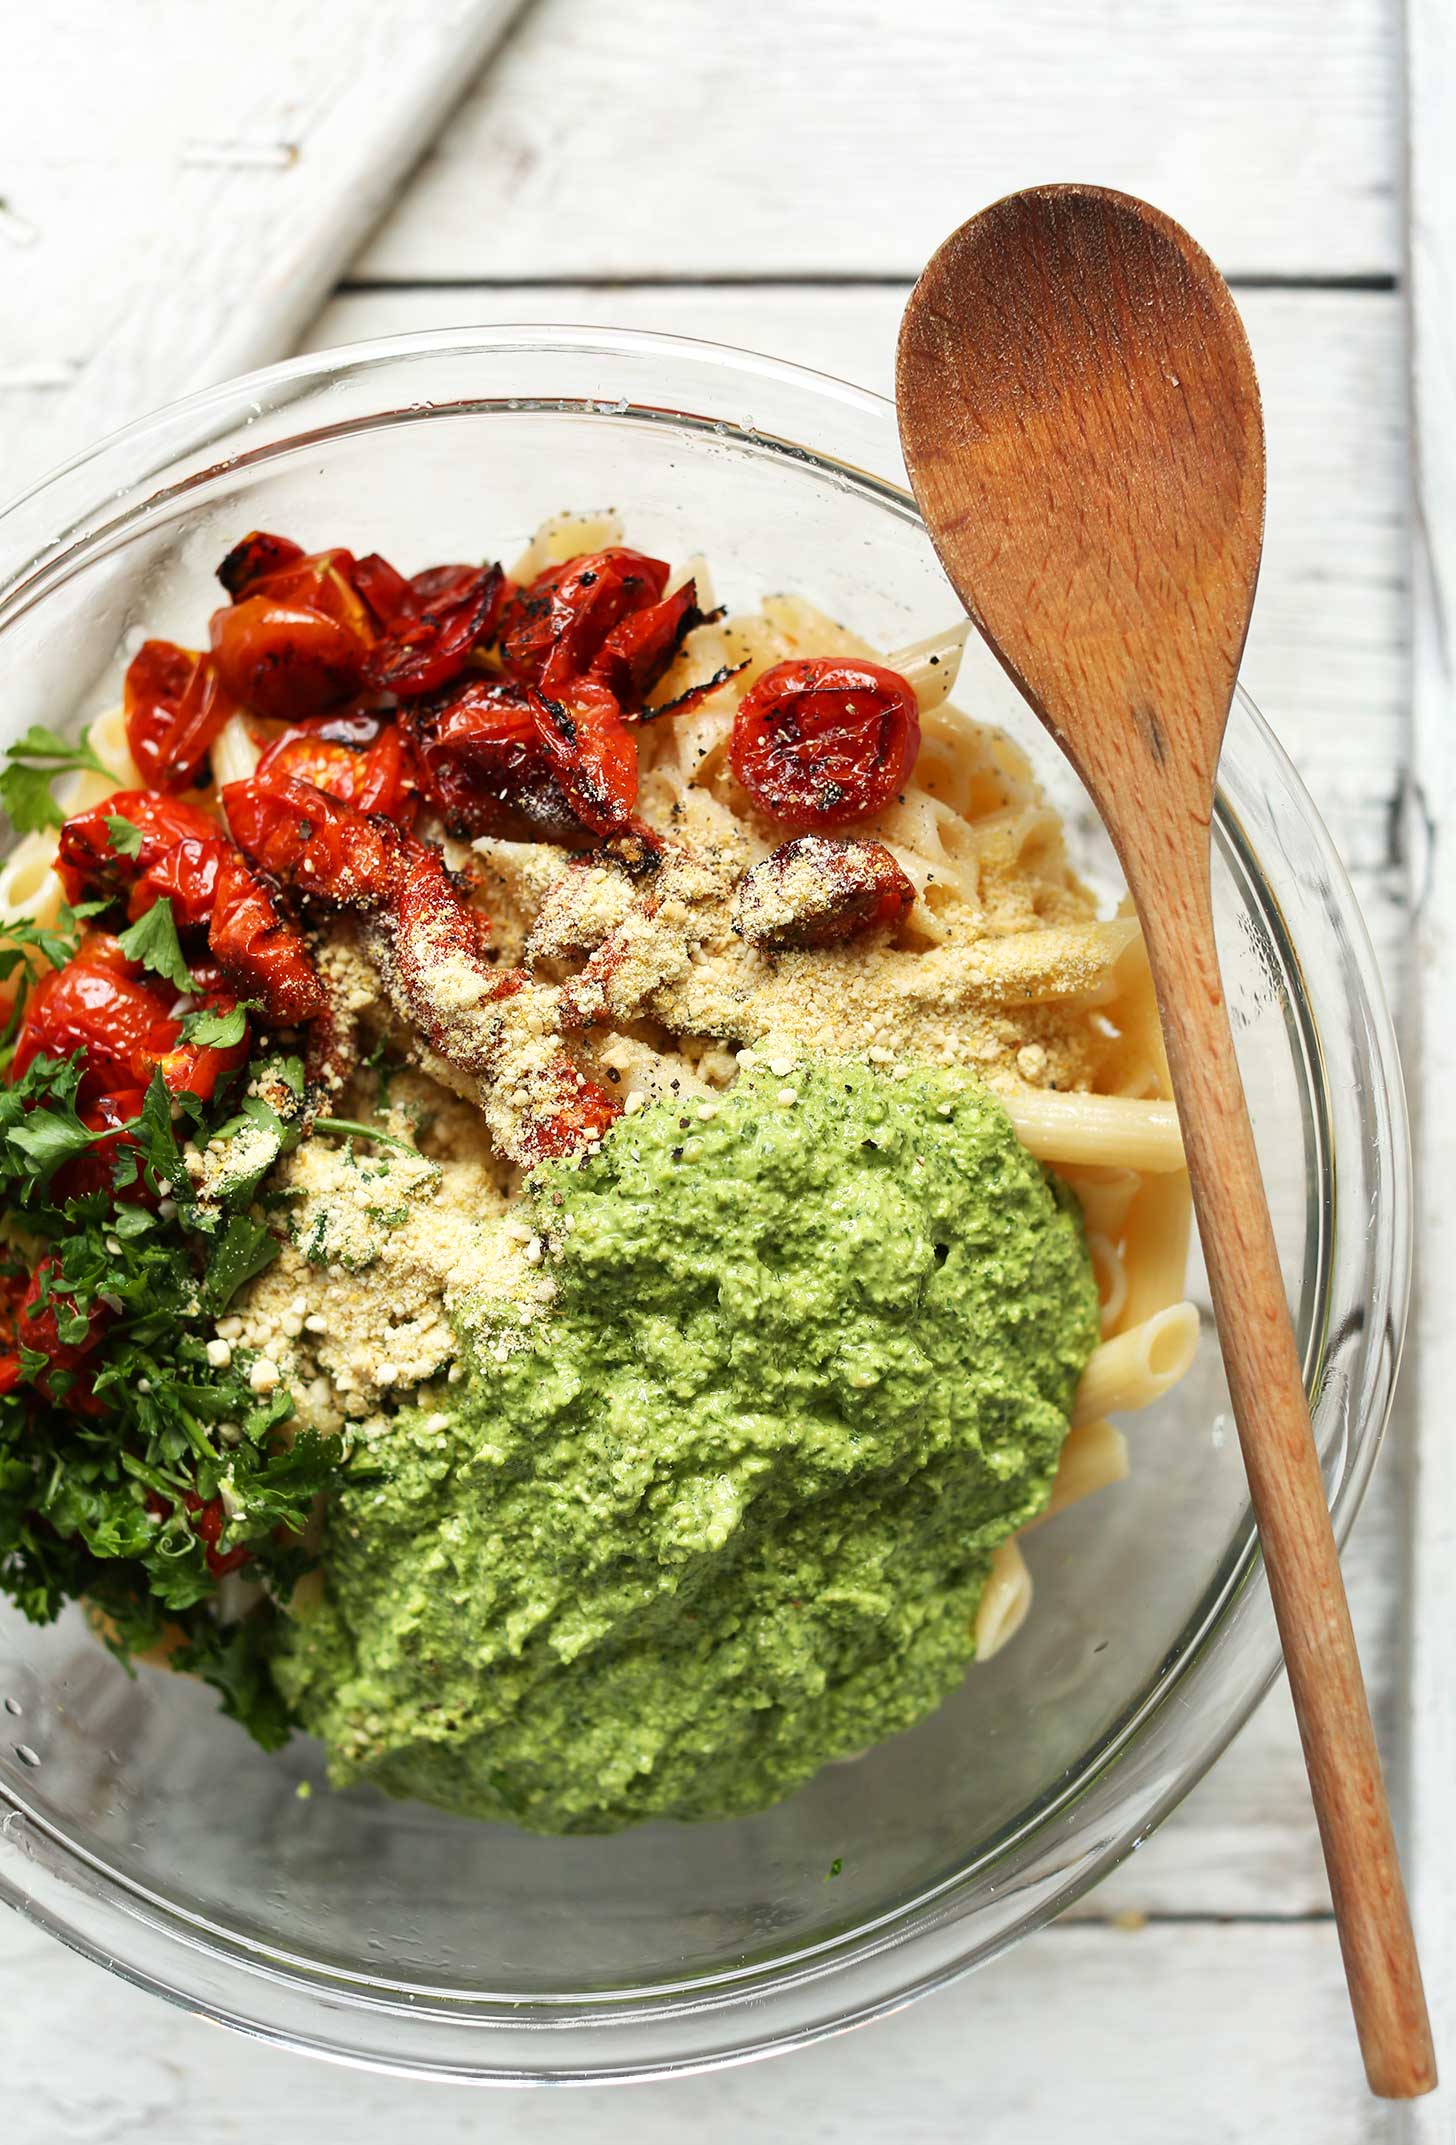 Mixing bowl with penne pasta salad for a gluten-free vegan meal